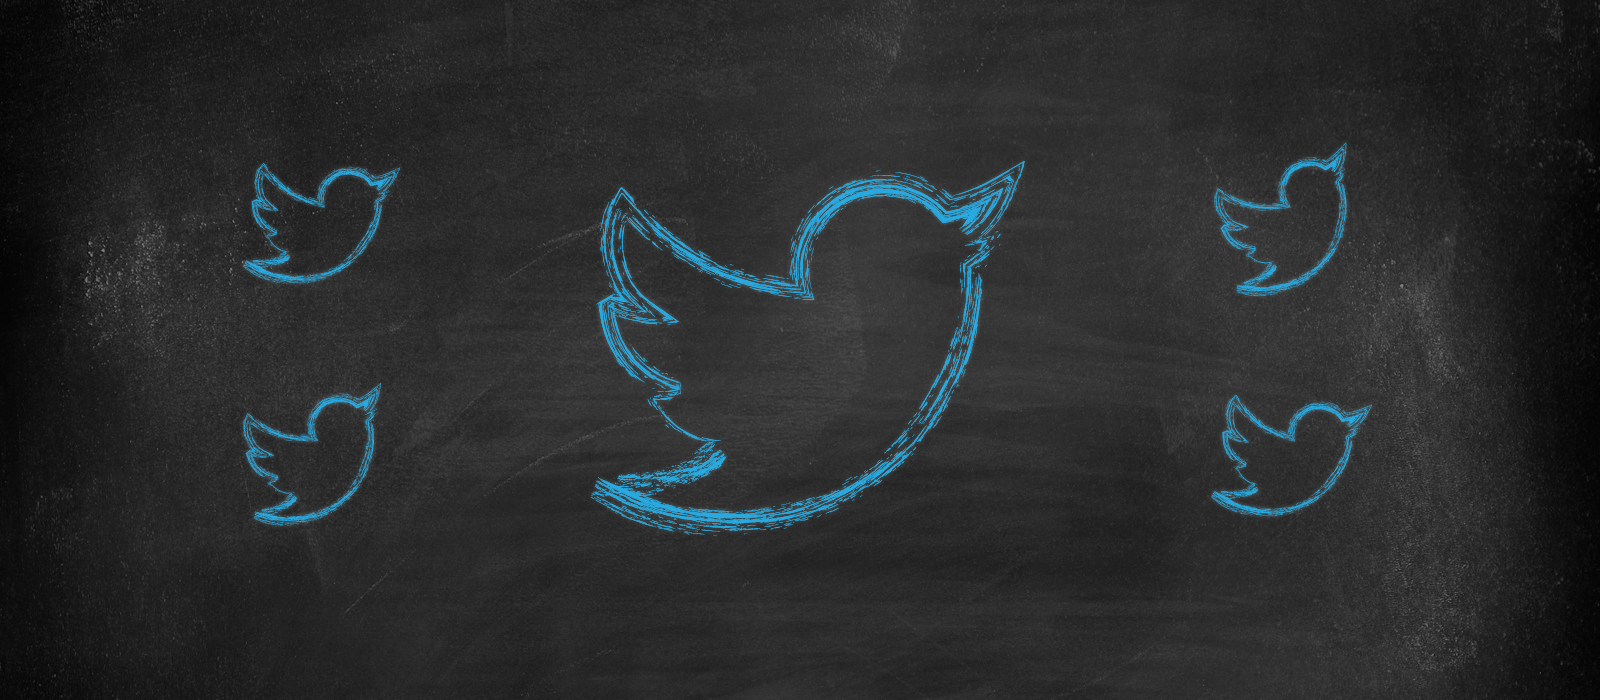 5 amazing things you didn't know you could do on Twitter